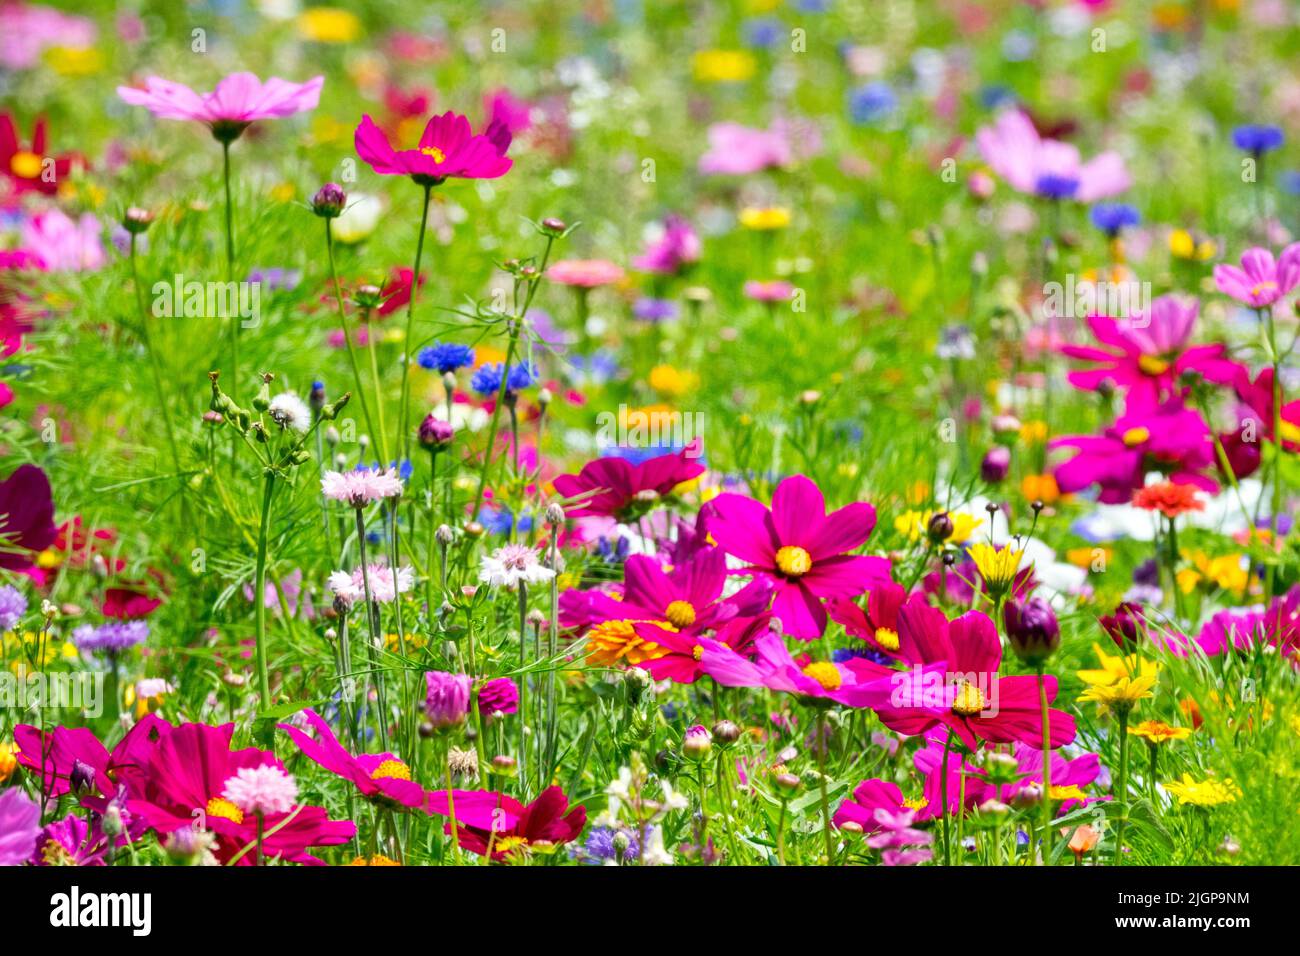 Flowery meadow Annual plants Common Cosmos Cornflower Mexican aster Pink purple mixed flowers colourful sunny place Stock Photo